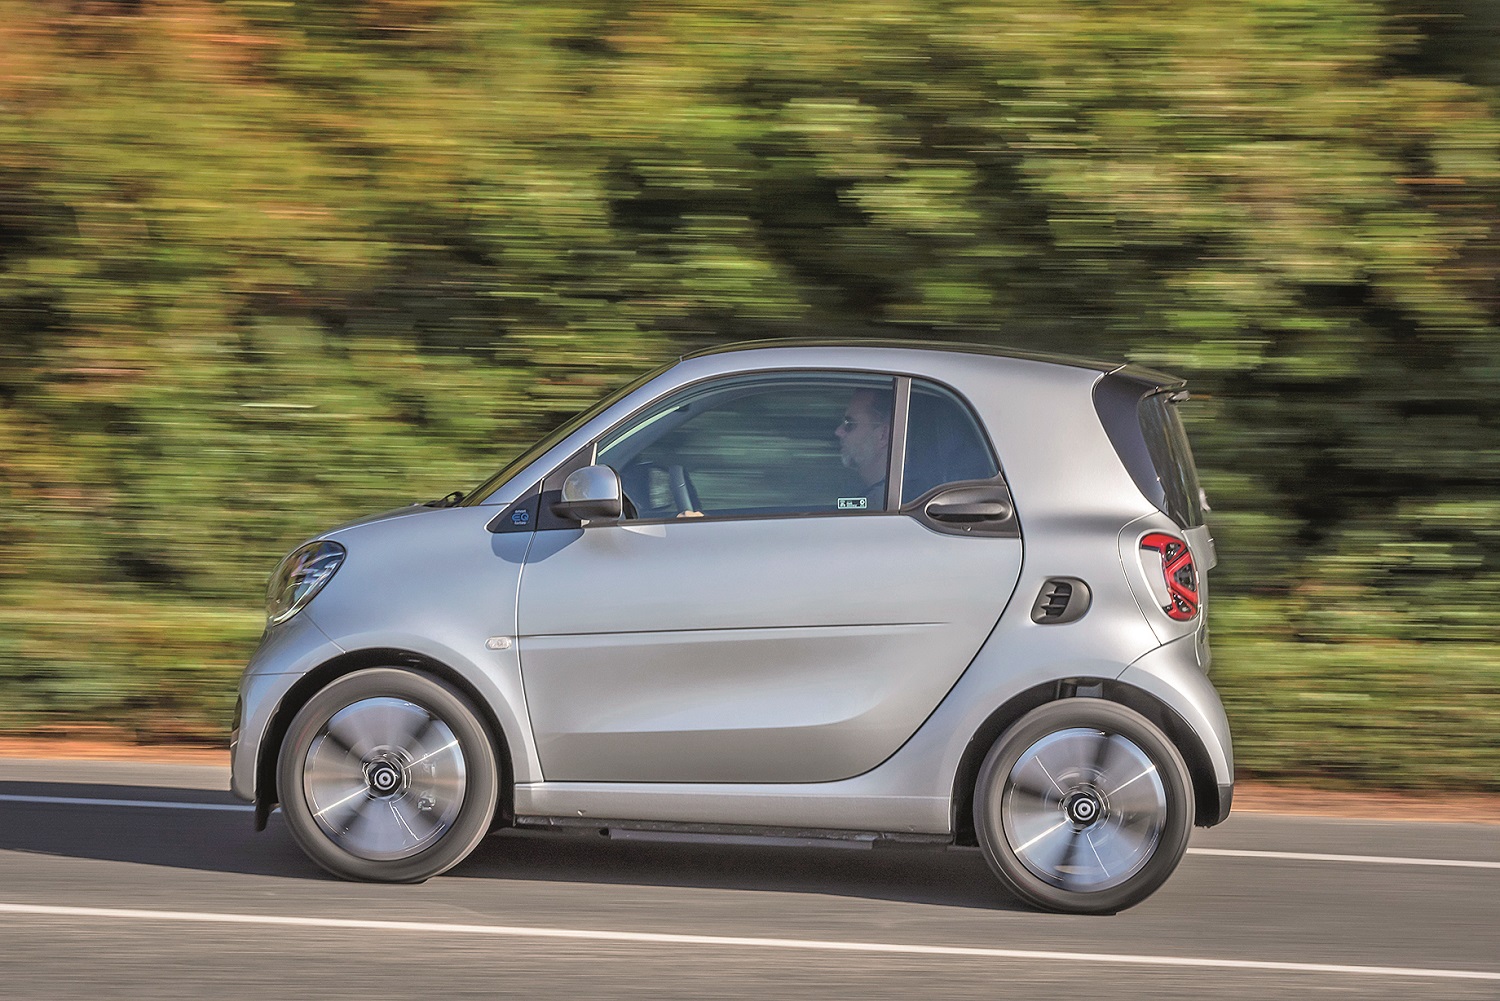 smart EQ fortwo, coupe, cool silver, prime line, interior black fabric with grey topstitching

 
smart EQ fortwo, coupe, Stromverbrauch kombiniert, 4,6 kW-Bordlader, (kWh/100 km), 16,5-15,2; CO2-Emission kombiniert (g/km) 0 // Combined power consumption, 4.6 kW on-board charger, (kWh/100 km), 16.5-15.2; Combined CO2 emissions (g/km) 0
smart EQ fortwo, coupe,  Stromverbrauch kombiniert, 22 kW-Bordlader, (kWh/100 km), 15,2-14,0; CO2-Emission kombiniert (g/km) 0 // Combined power consumption, 22 kW on-board charger, (kWh/100 km), 15.2-14.0; Combined CO2 emissions (g/km) 0
